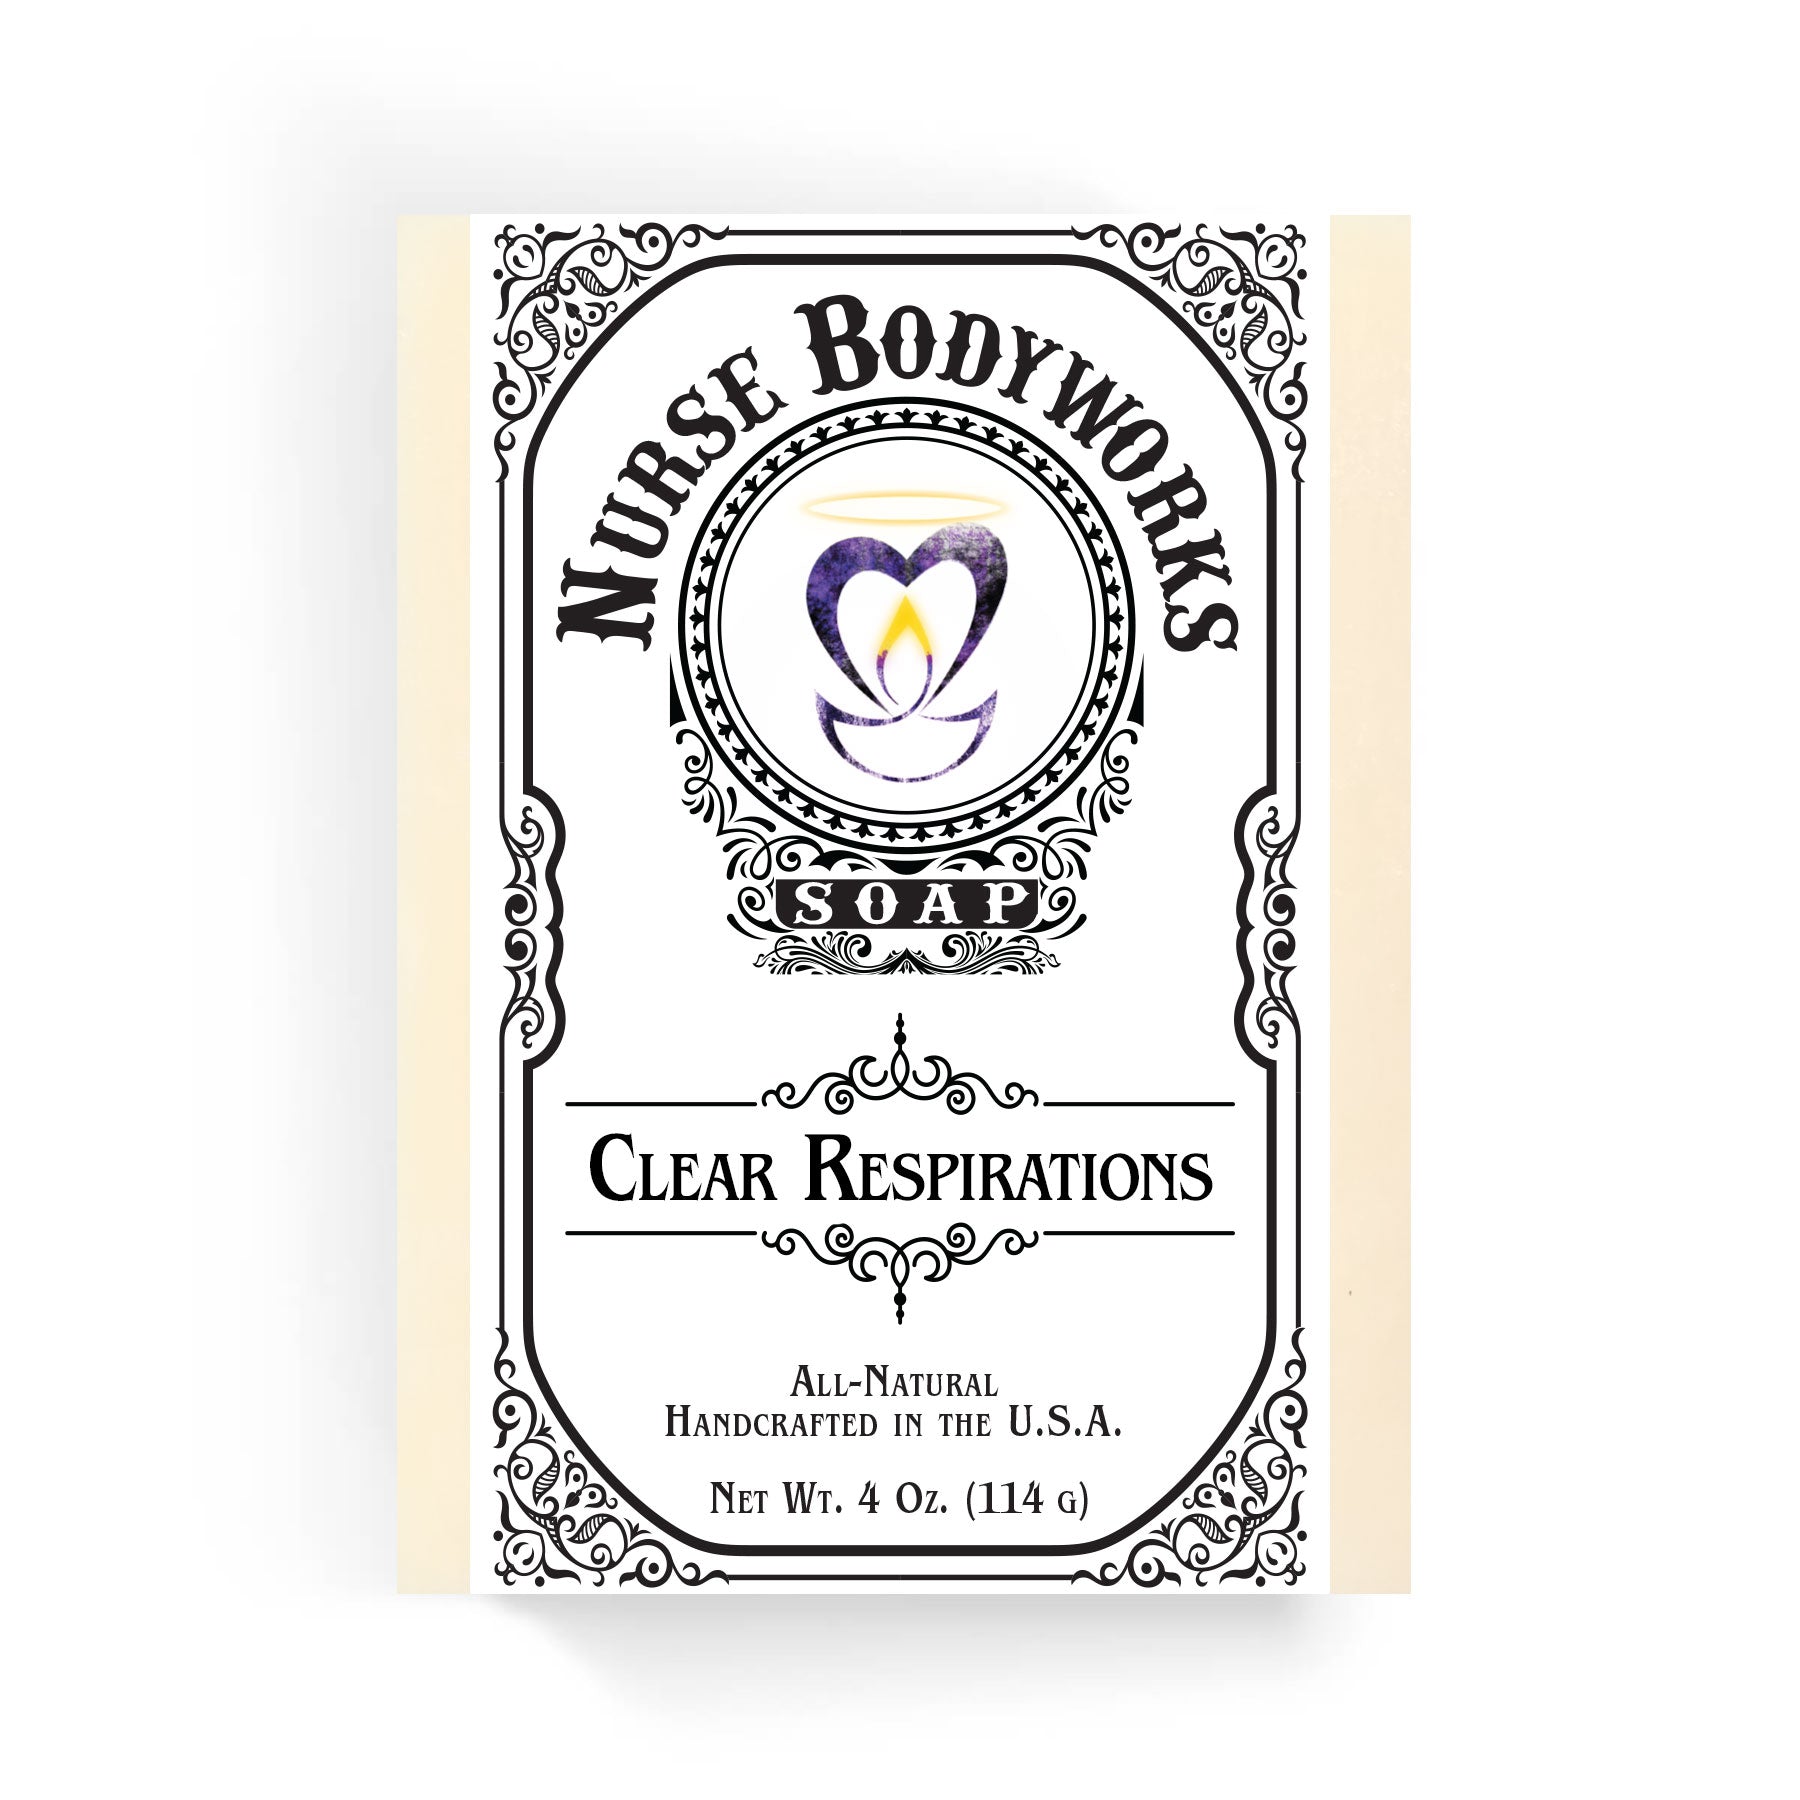 Clear Respirations Handmade Natural Soap by Nurse Bodyworks